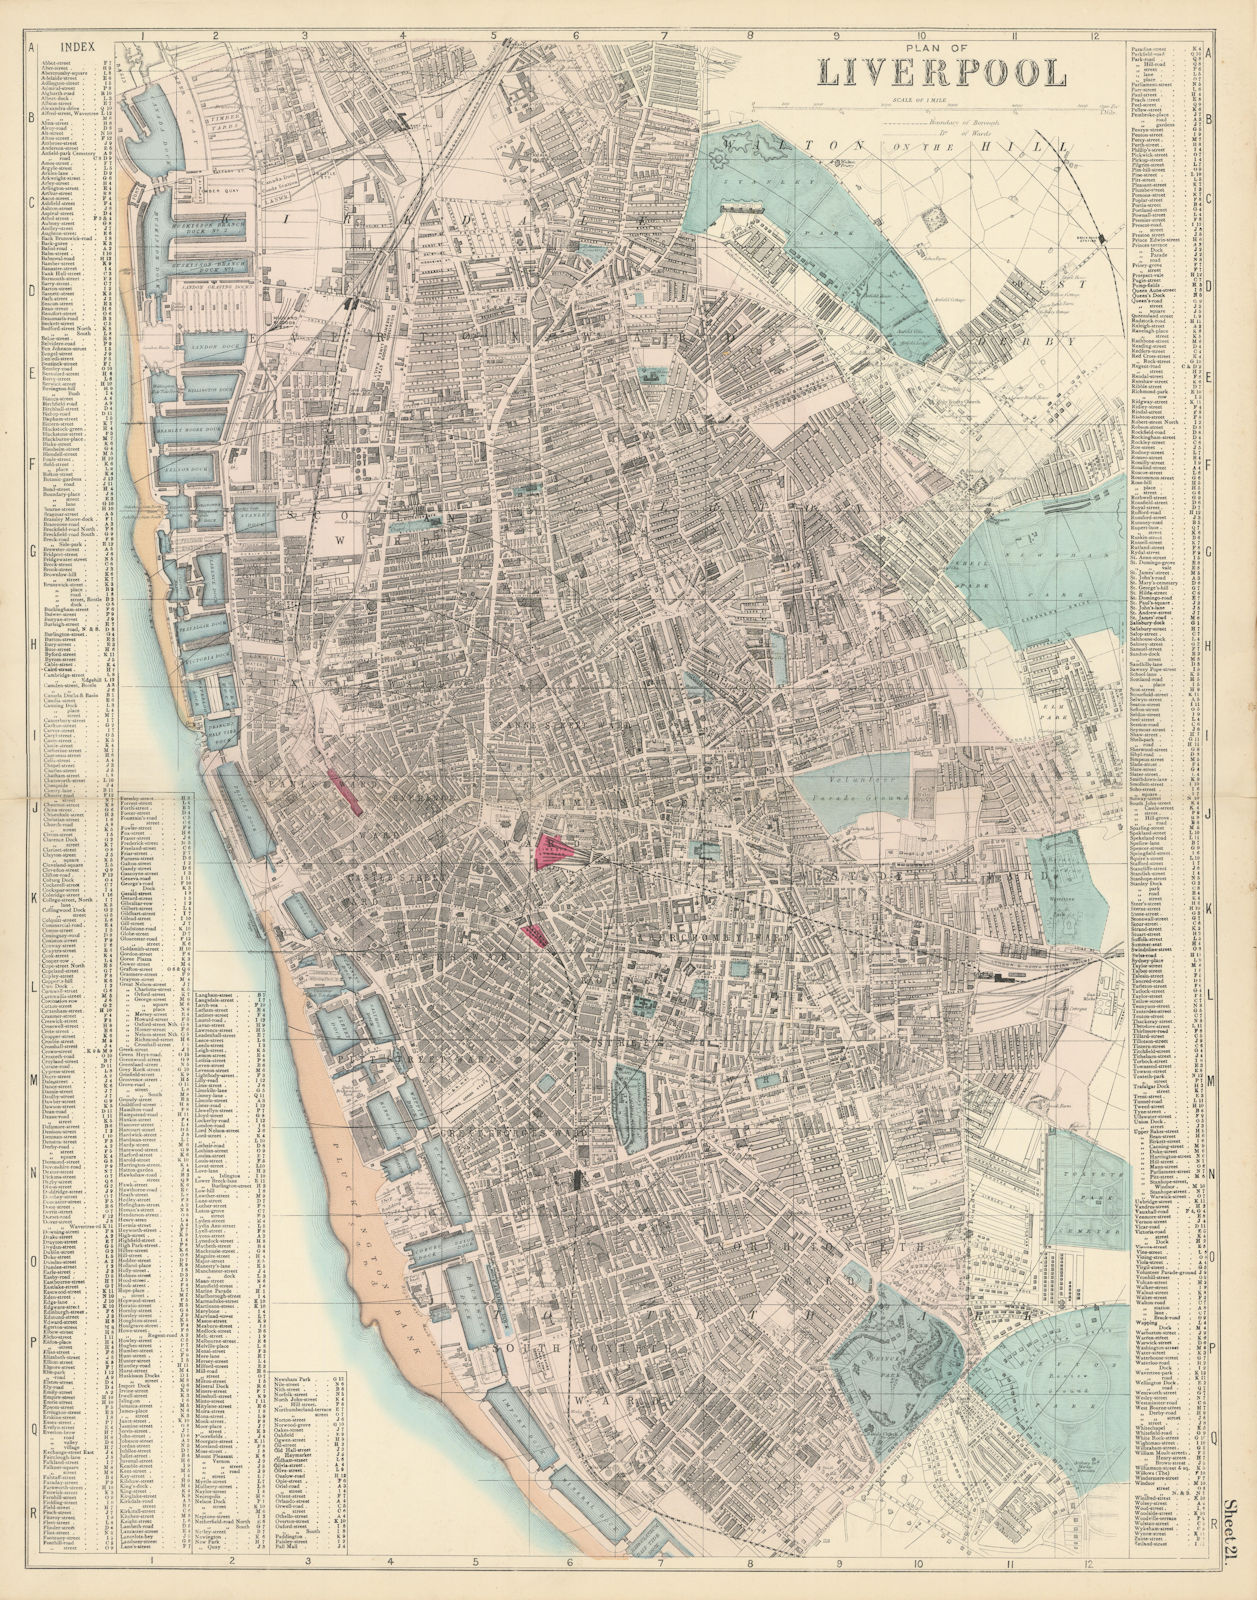 Associate Product LIVERPOOL Everton Waterfront Vauxhall Toxteth town city plan BACON 1883 map